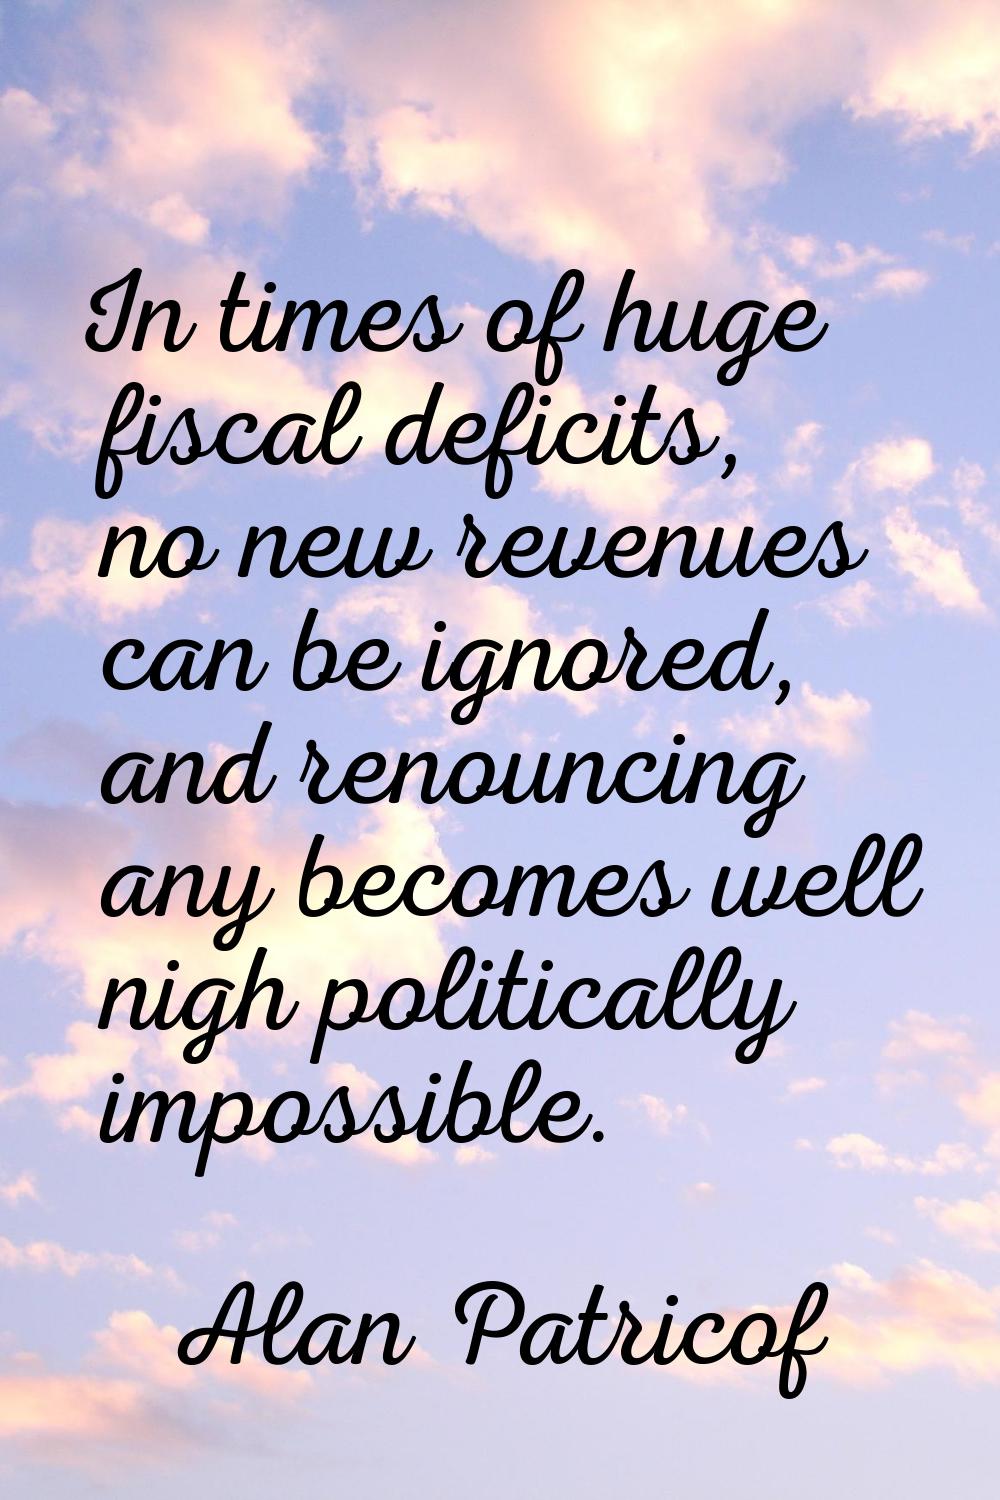 In times of huge fiscal deficits, no new revenues can be ignored, and renouncing any becomes well n